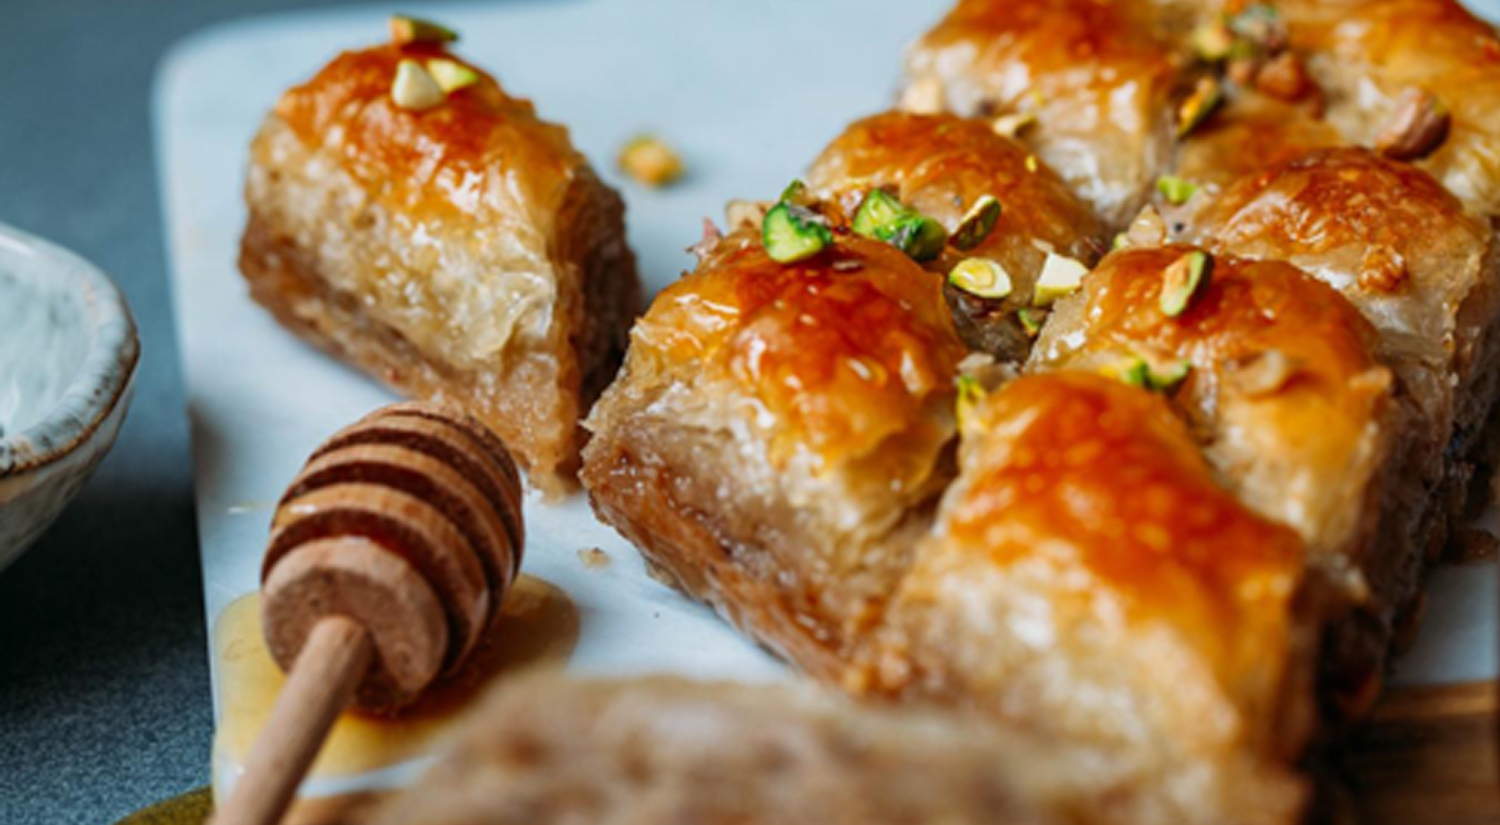 Honey and cardamom baklava is a showstopper dessert that's surprisingly easy to put together. Credit: zhairguns via Getty Images